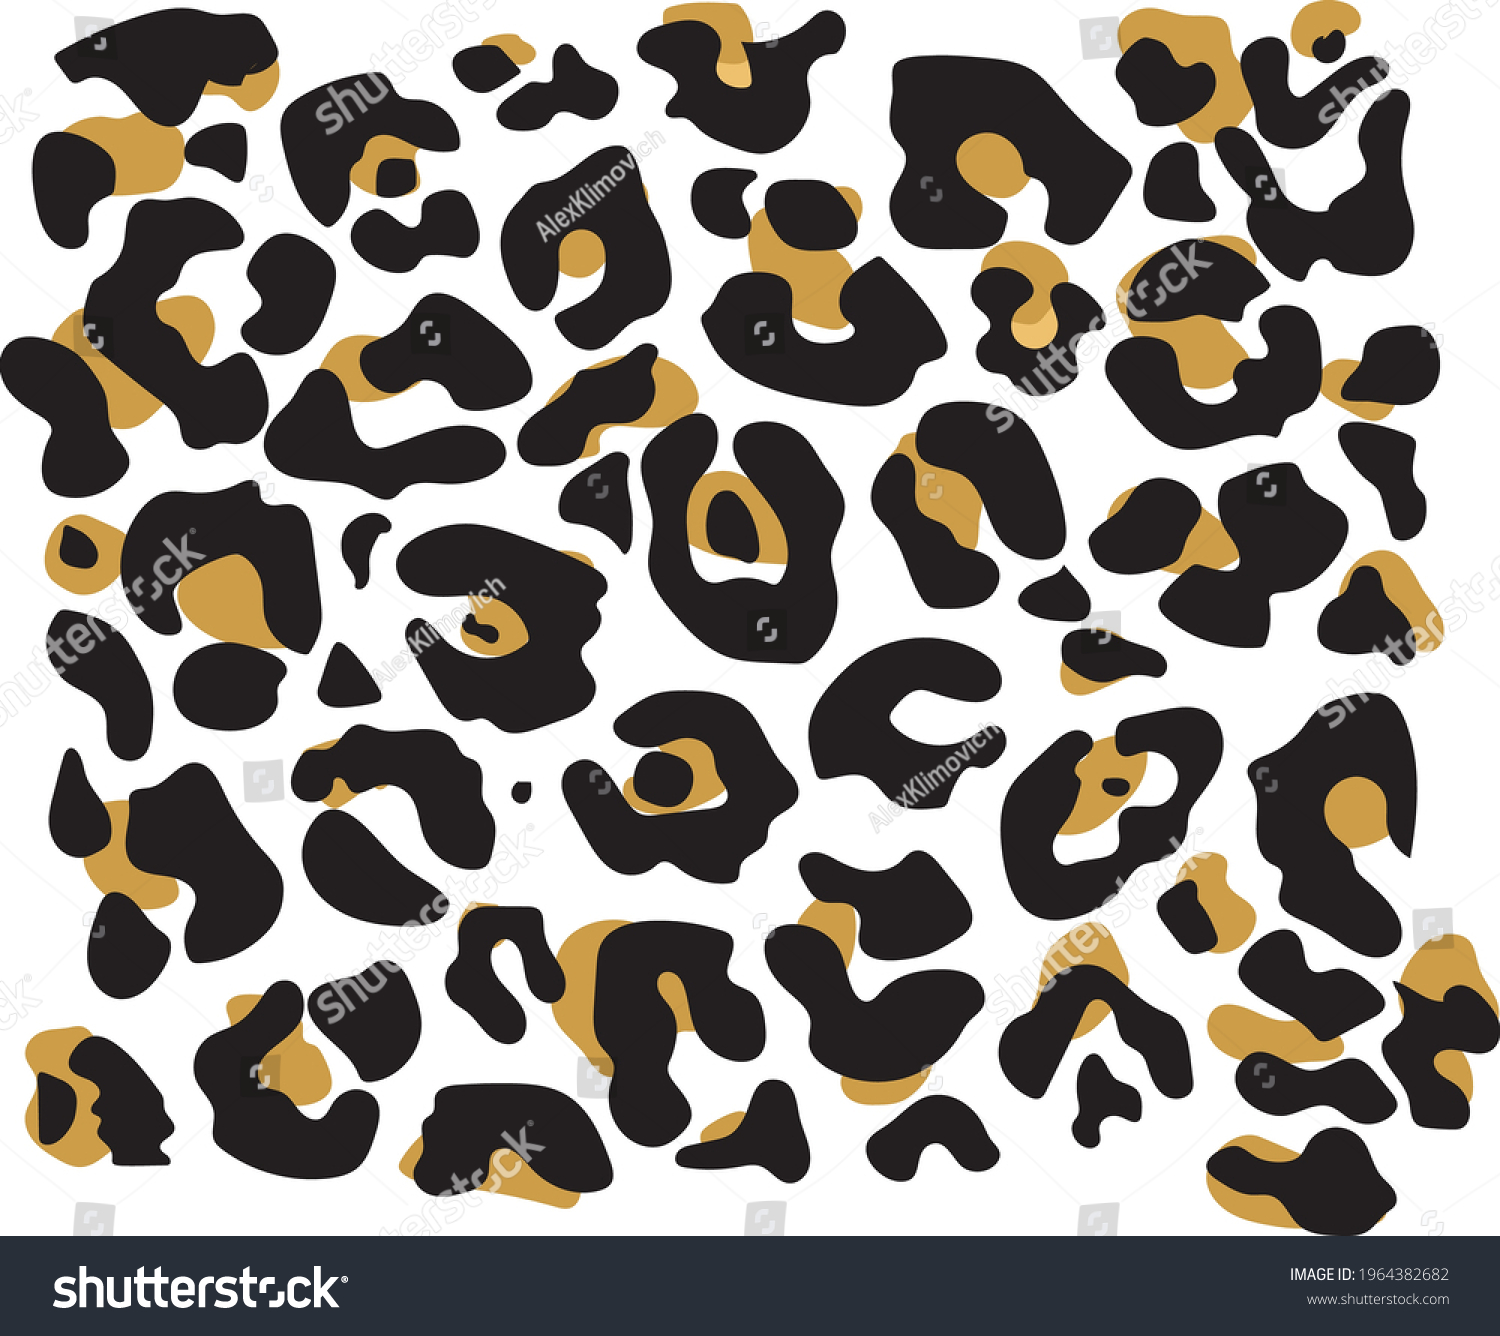 SVG of Leopard pattern Svg Leopard.  shirt design. Leopard design.Vector illustration isolated on white background. Cutting file for Silhouette and Cricut. svg